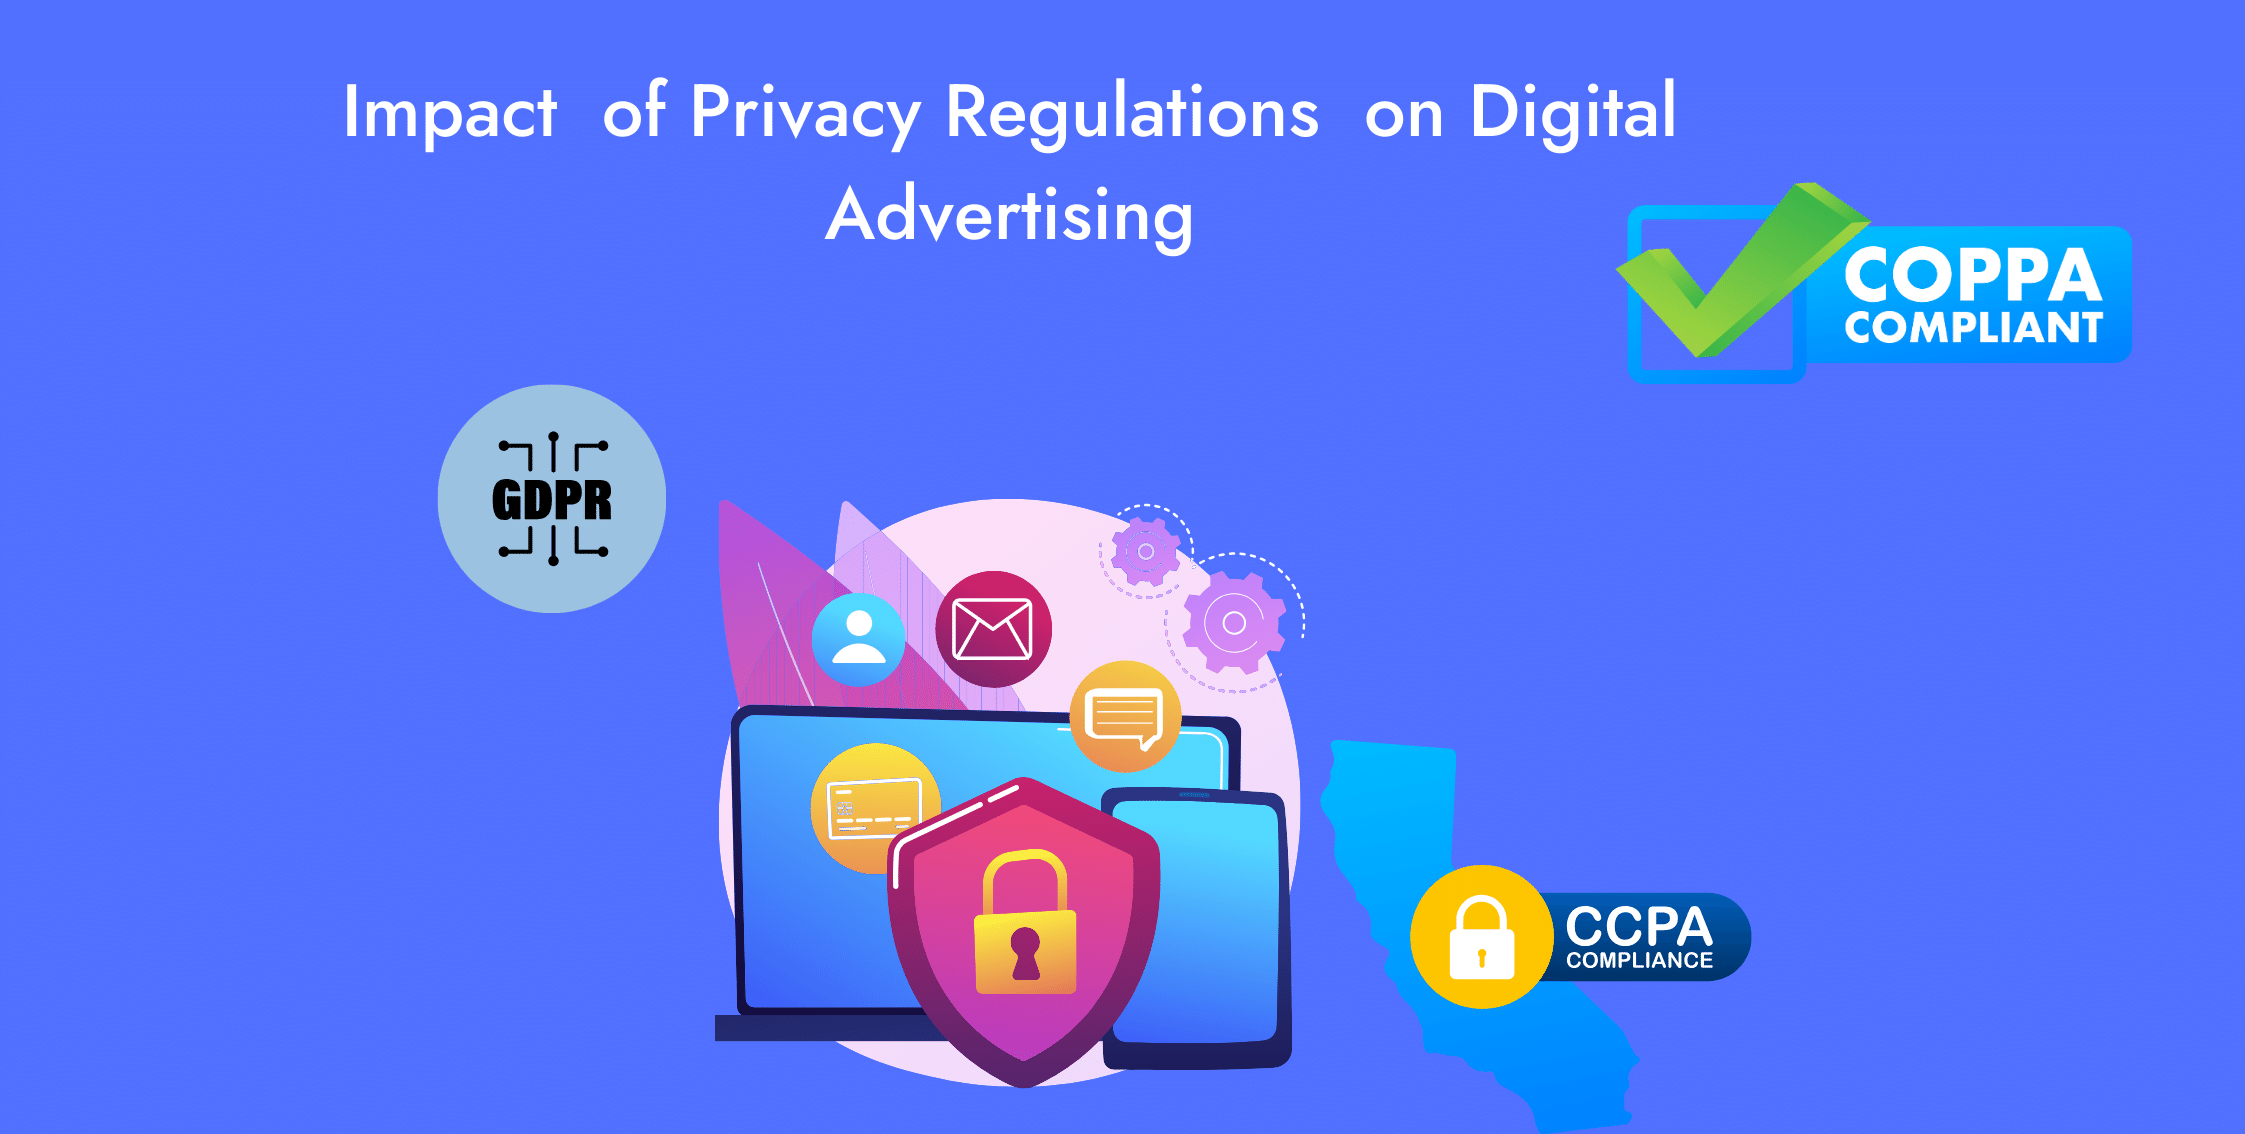 The Impact of Privacy Regulations on Digital Advertising